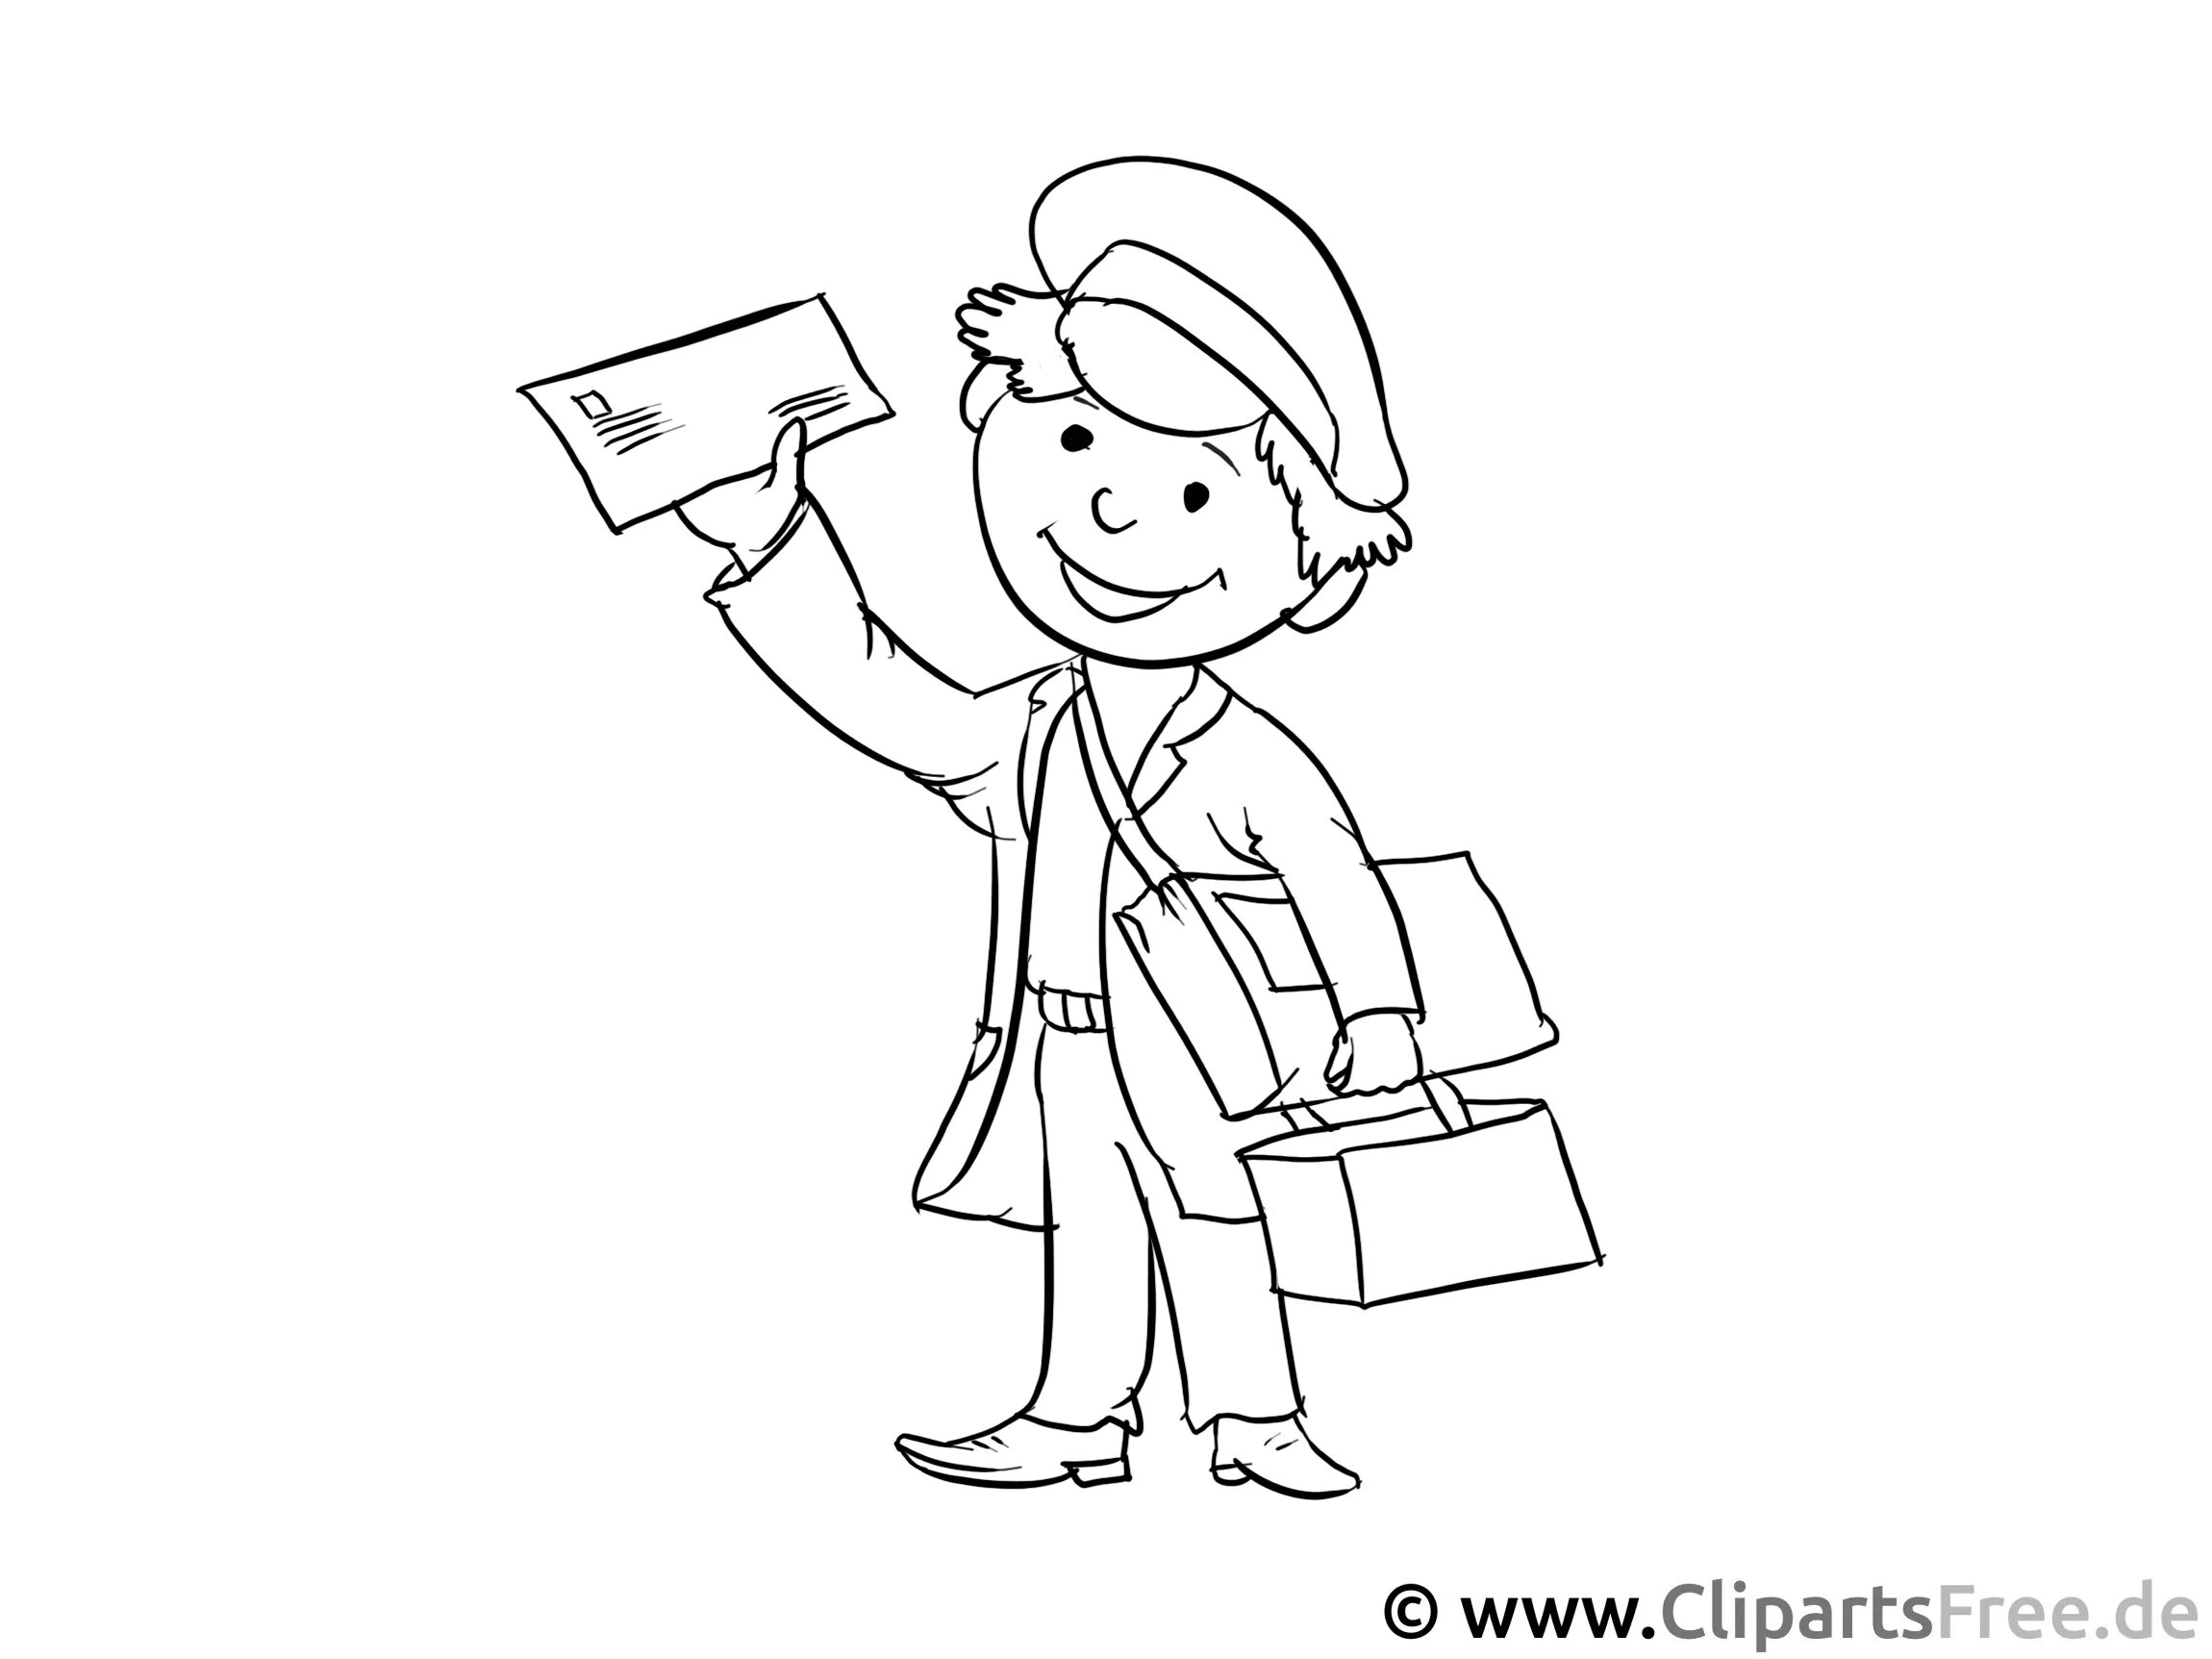 Animated post office coloring page